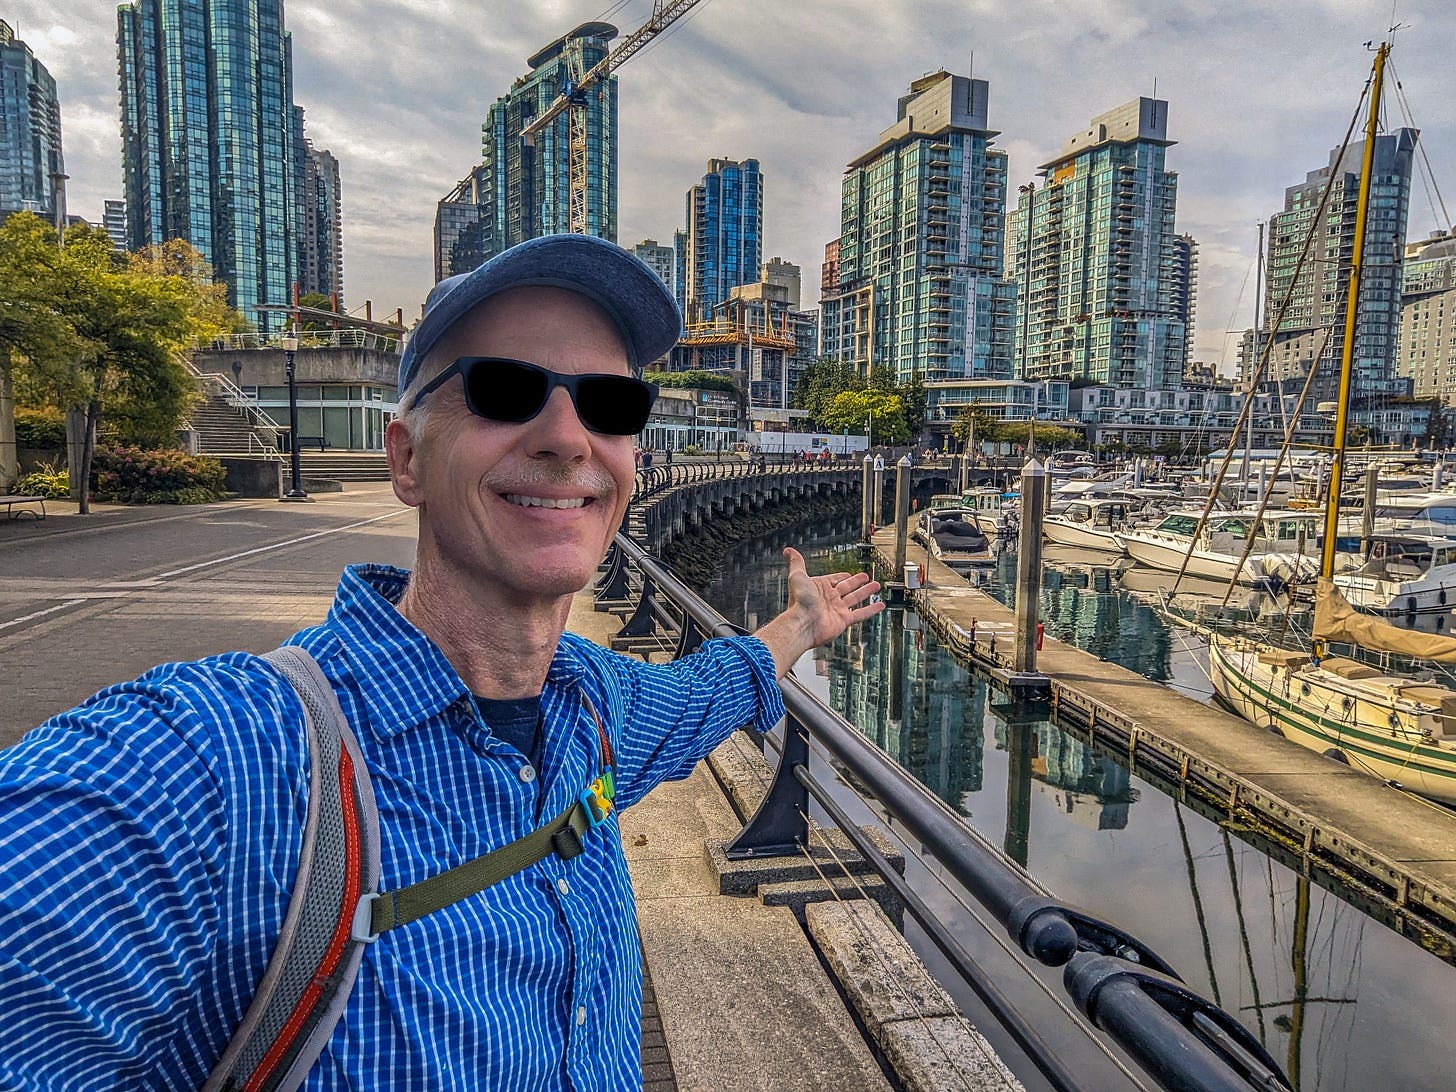 Michael standing on the waterfront gesturing at boats on the water and condos in the background. 